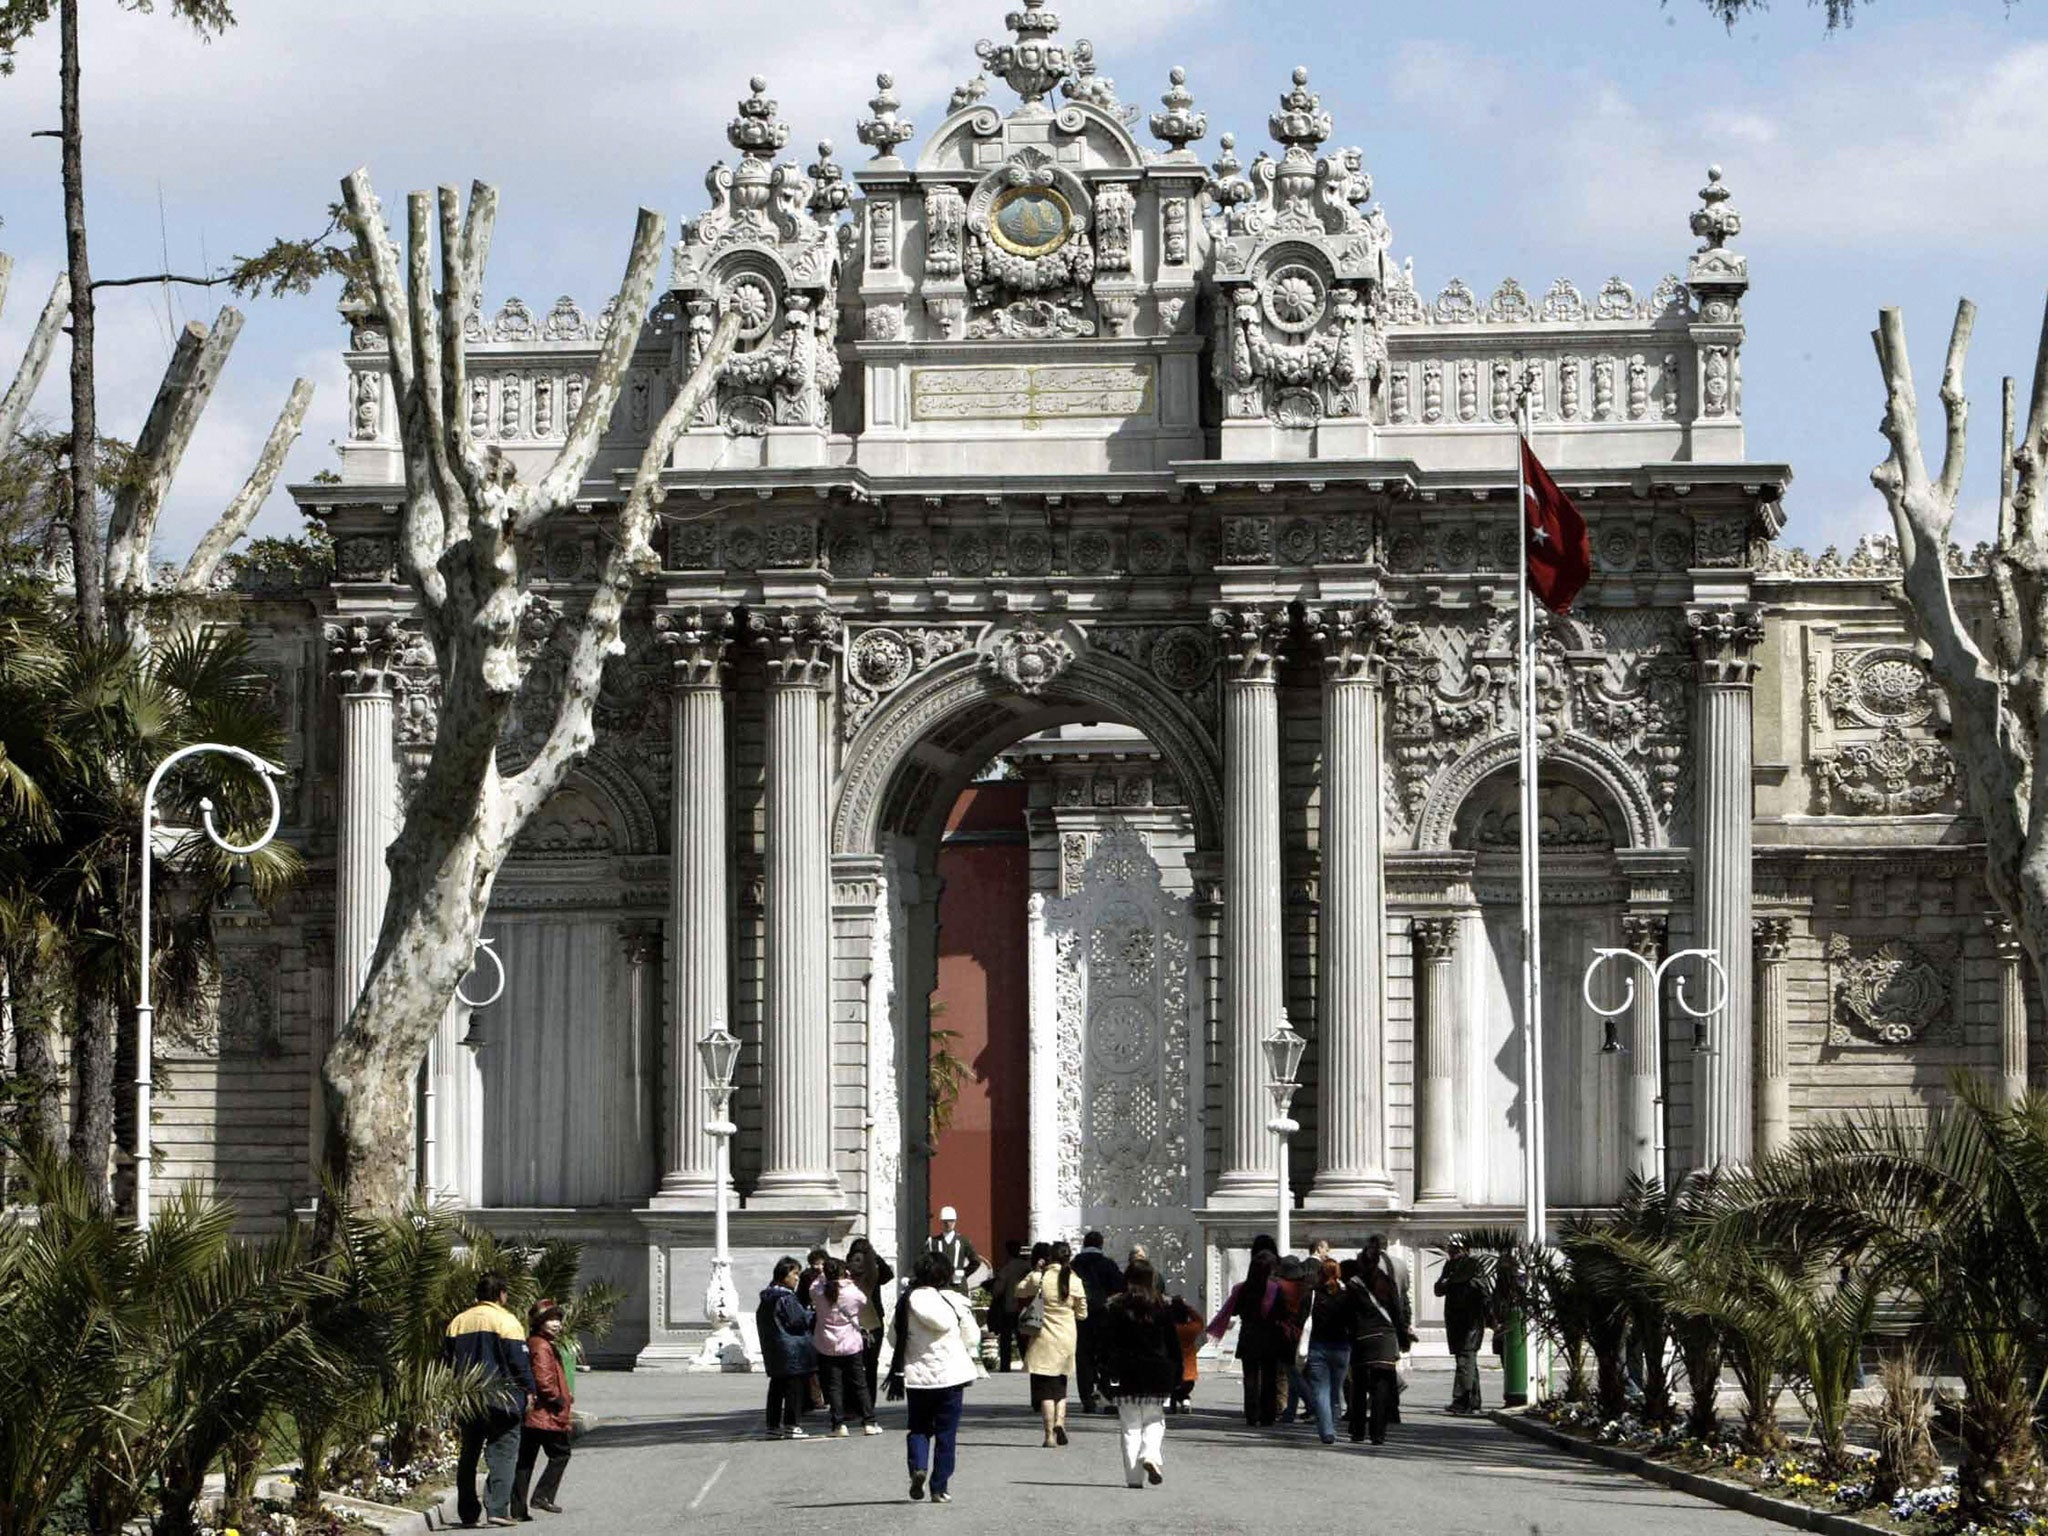 The Dolmabahce palace where a man was arrested